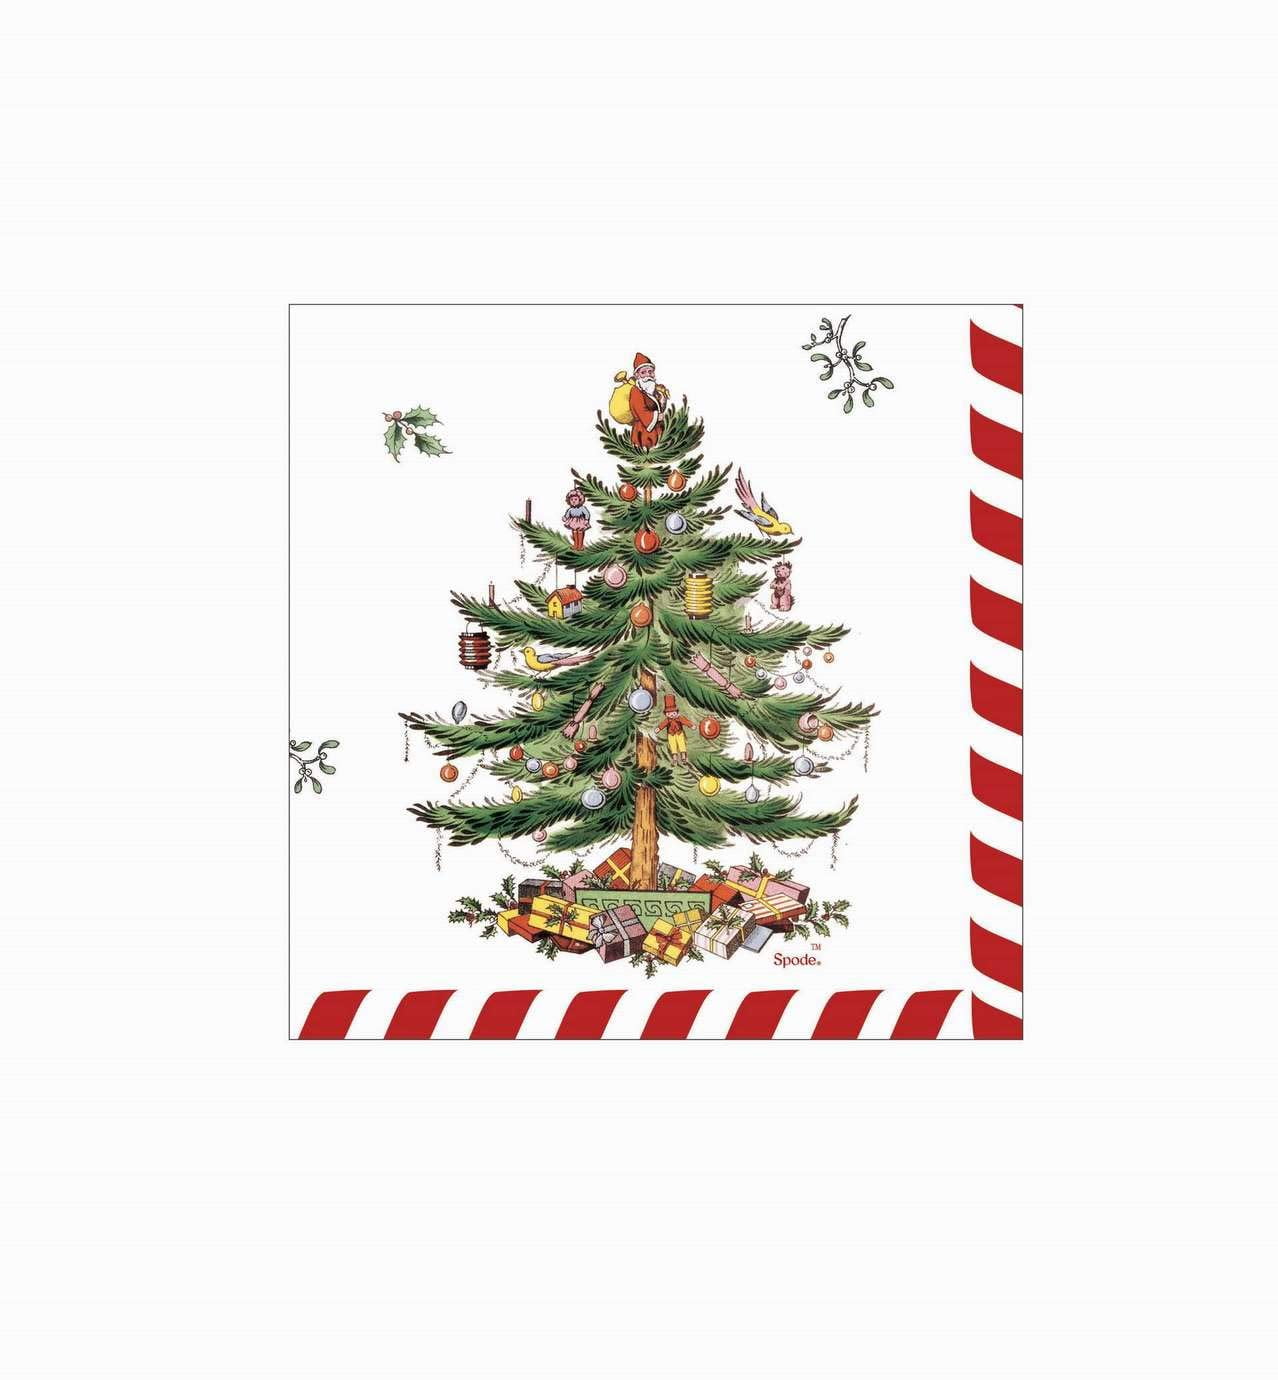 NWT C.R Gibson Spode Candy Cane Christmas Tree 40-Count Paper Cocktail Napkins